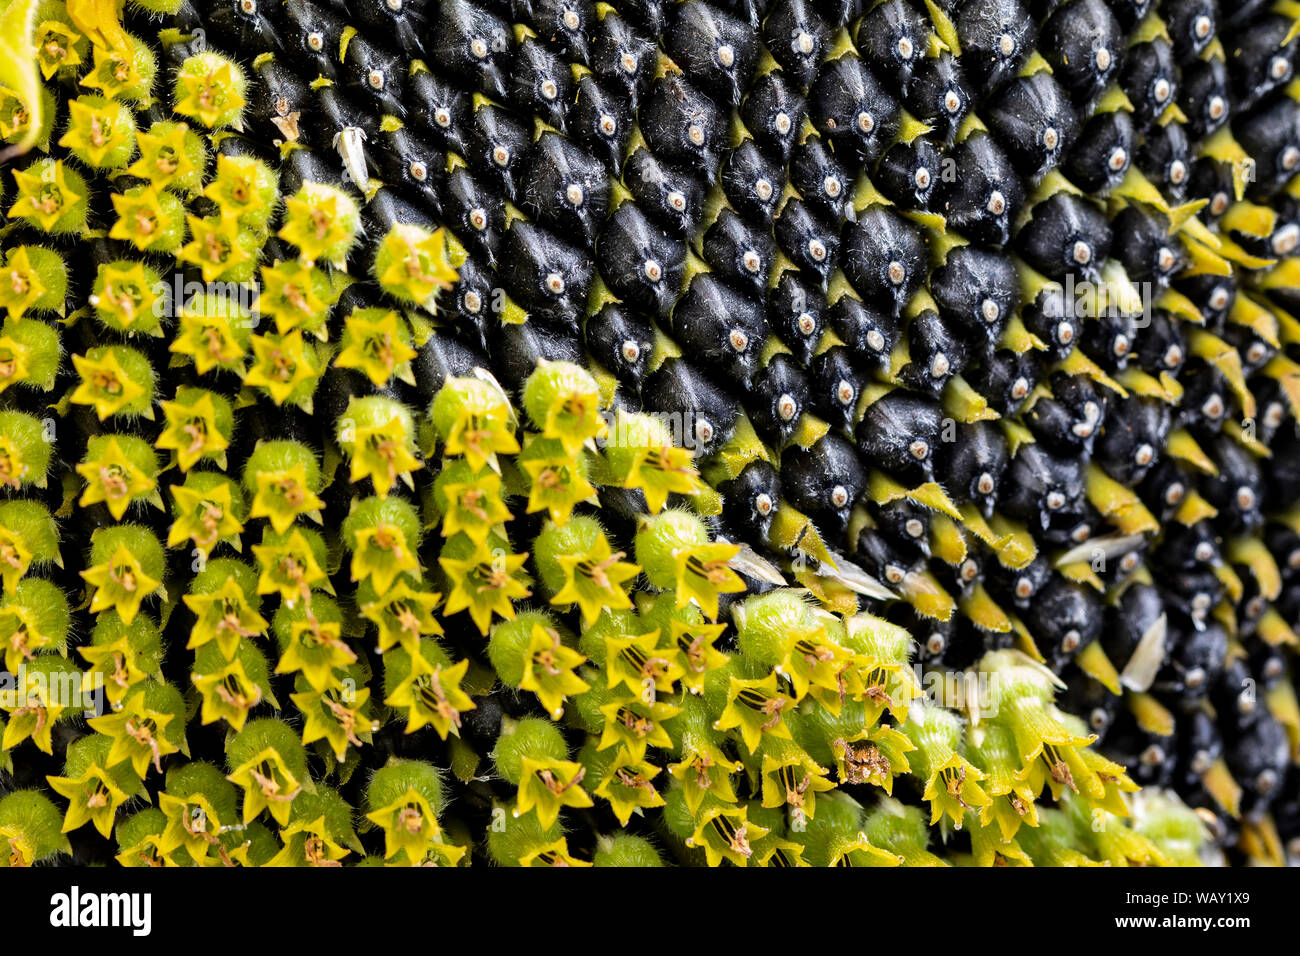 Sunflower with seeds and flowers in sight Stock Photo